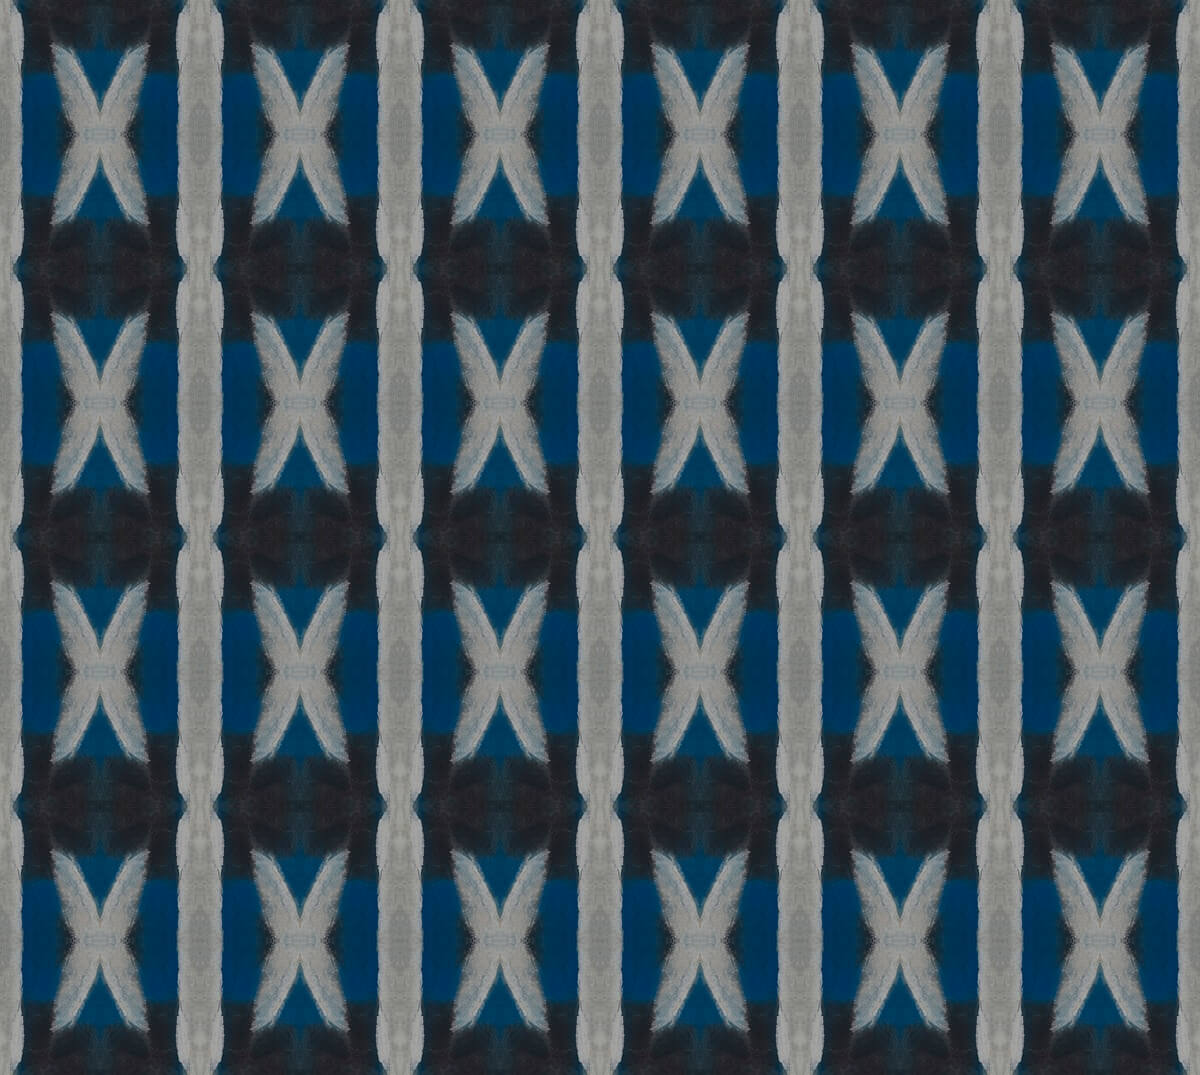 Solitude III pattern in black, blue, and gray